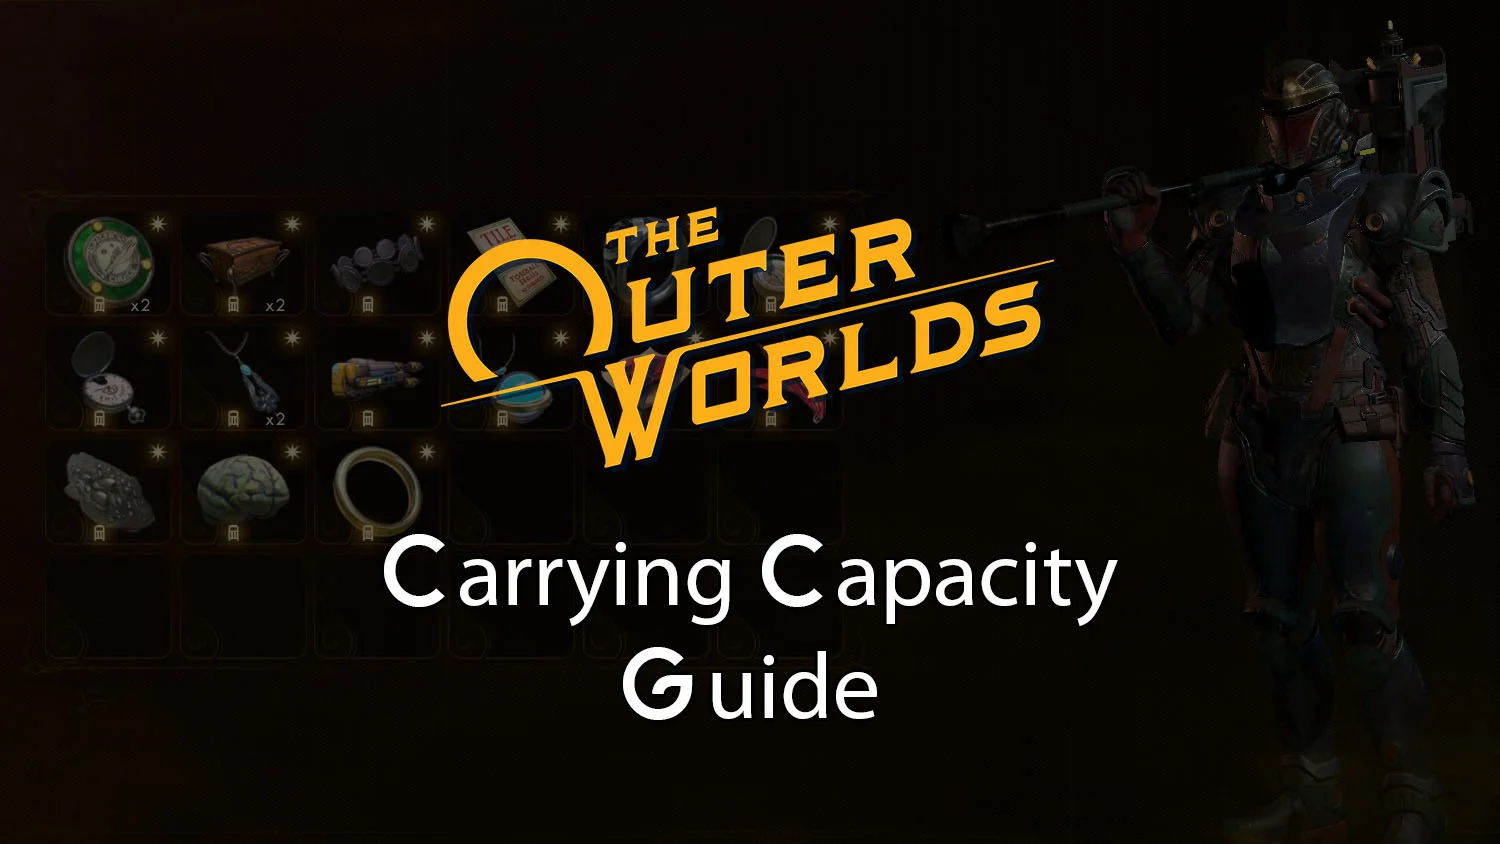 The Outer Worlds - How to Mod Weapons and Armor